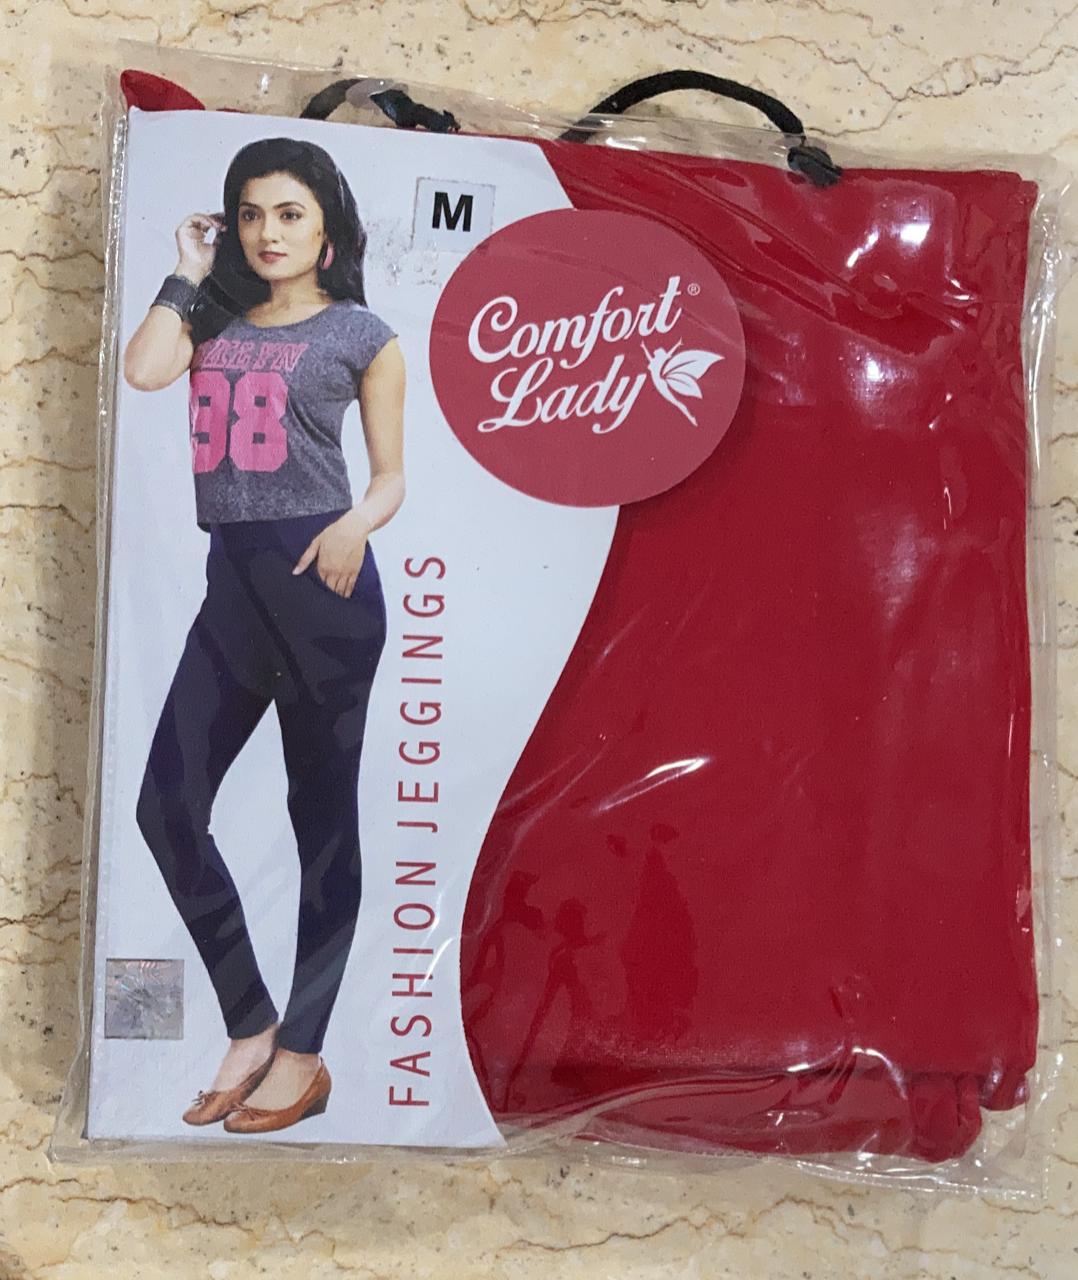 Unboxing & Review Of Comfort Lady Pant Reguler Size l Comfort Lady l Not  For Wholesale. - YouTube